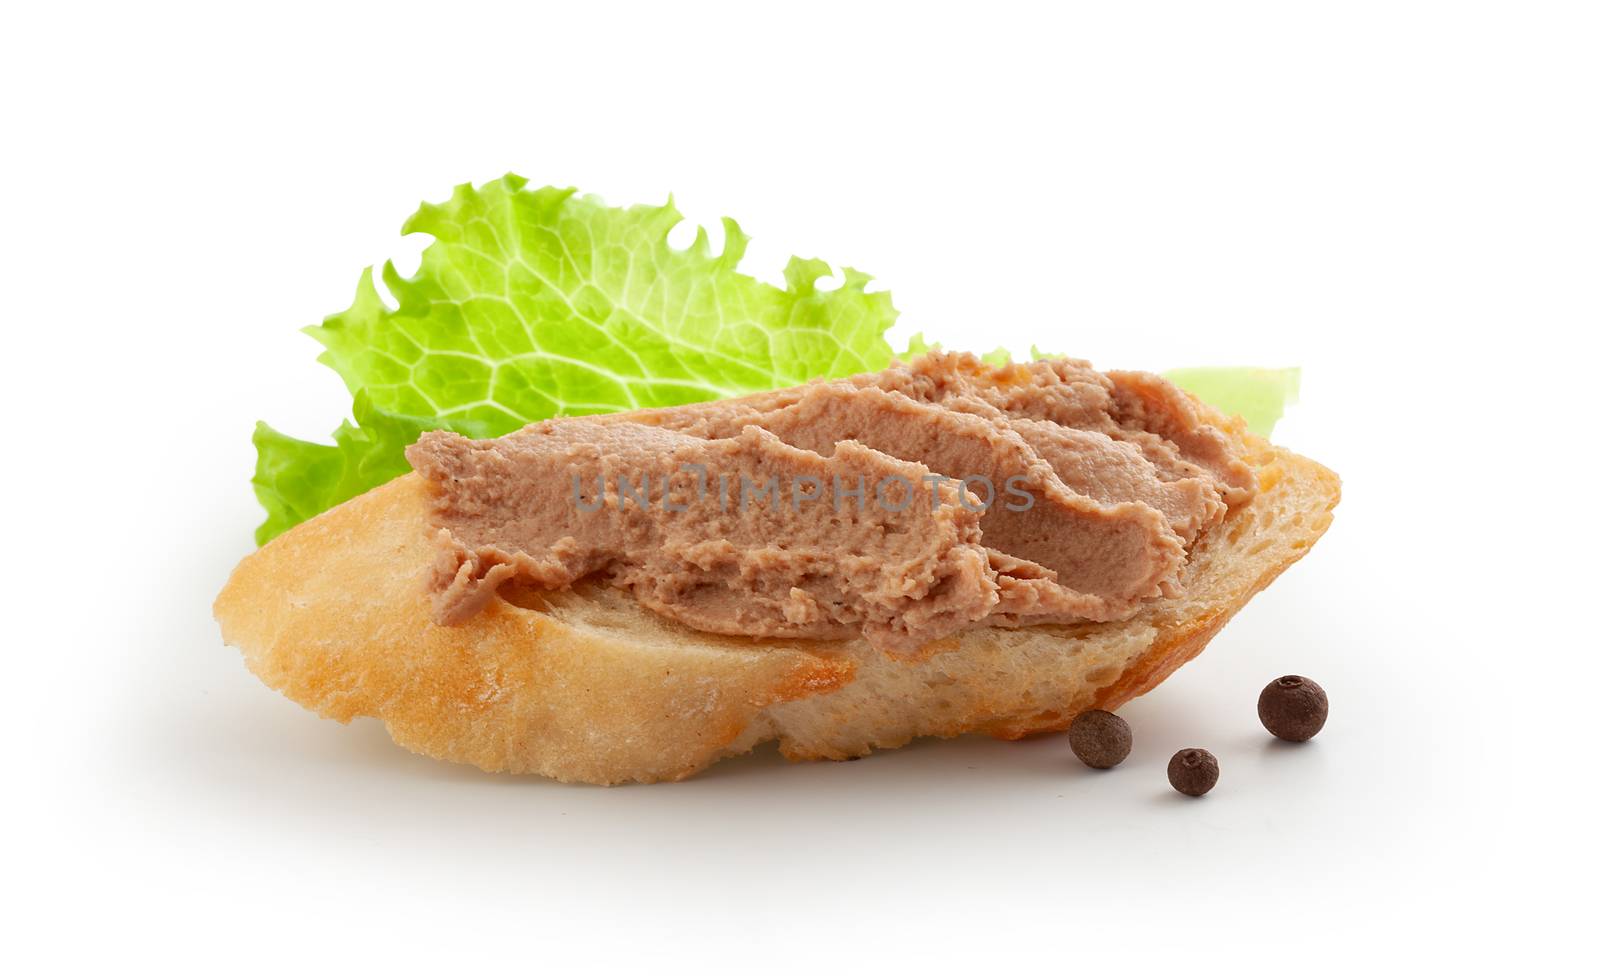 Isolated sandwich with meat pate, lettuce and black pepper